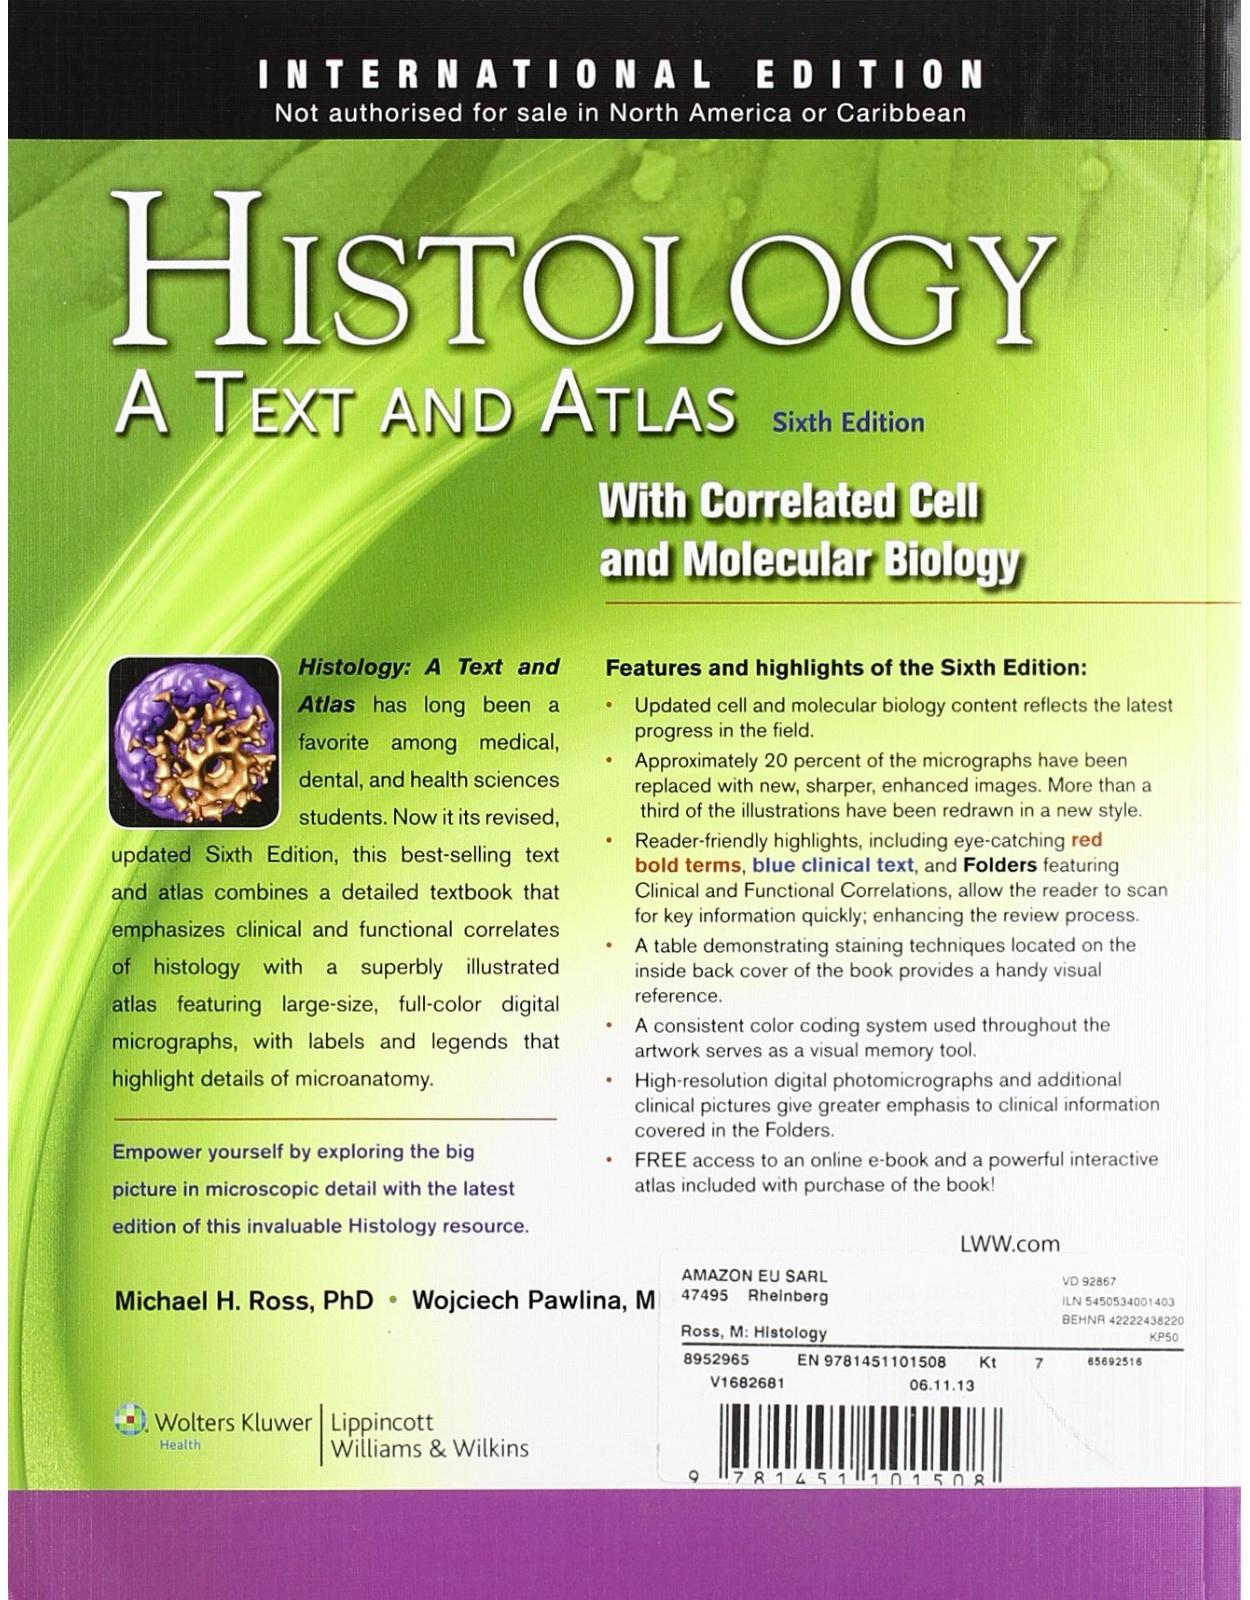 Histology: A Text and Atlas: With Correlated Cell and Molecular Biology 